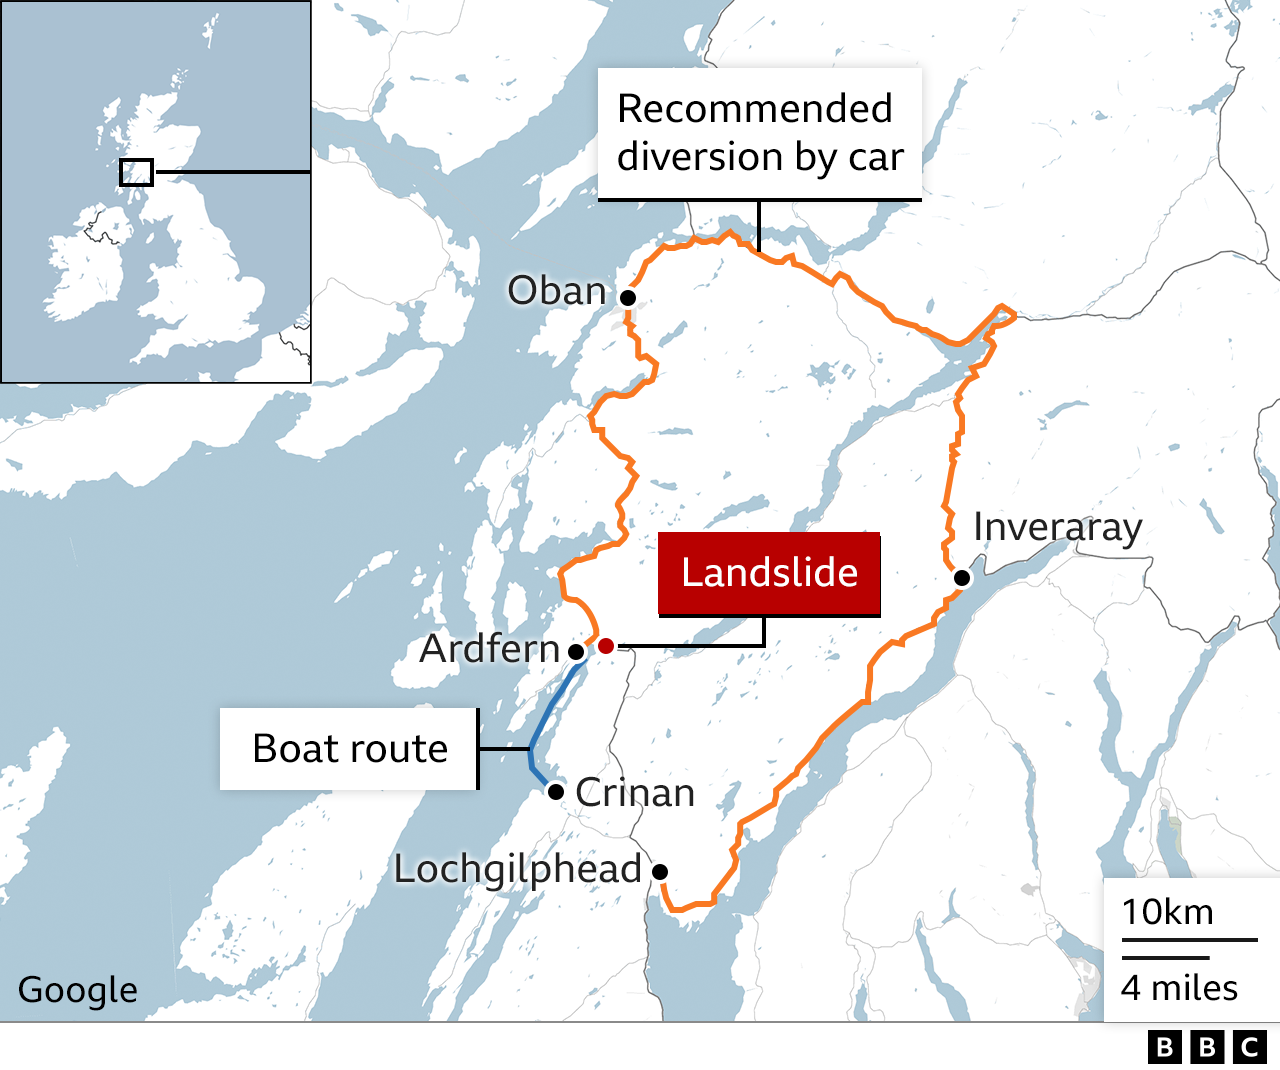 Map showing the recommended road diversion in place since the landslide near Ardfern